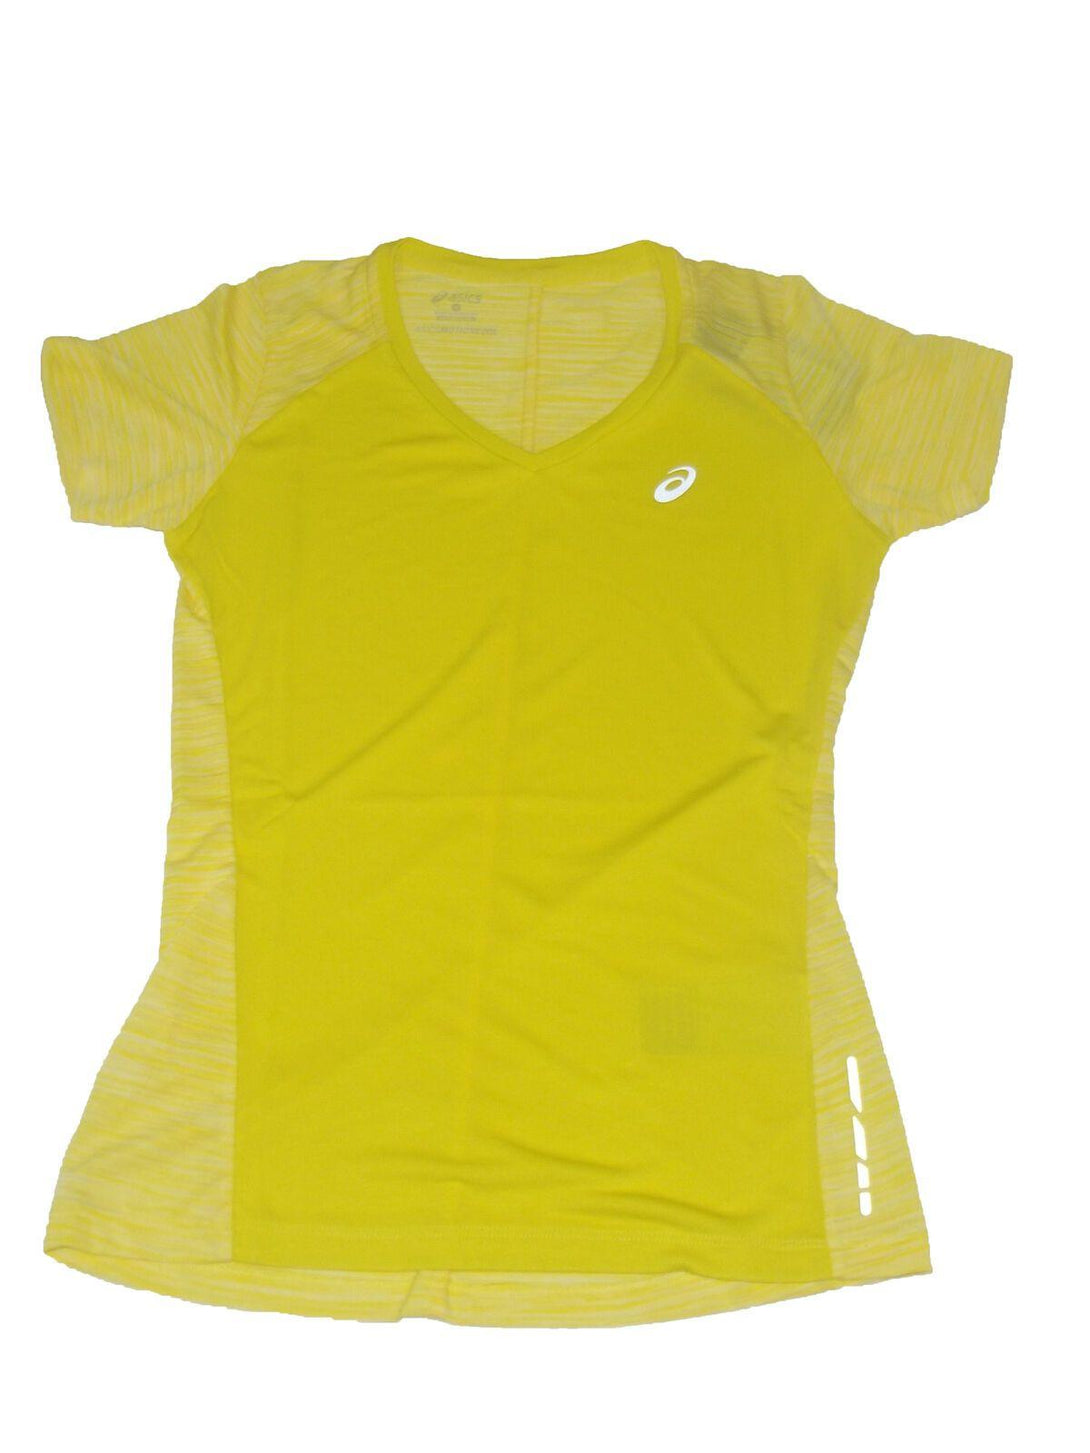 Rugby Heaven Asics Fuzex V Neck SS Top Womens - www.rugby-heaven.co.uk